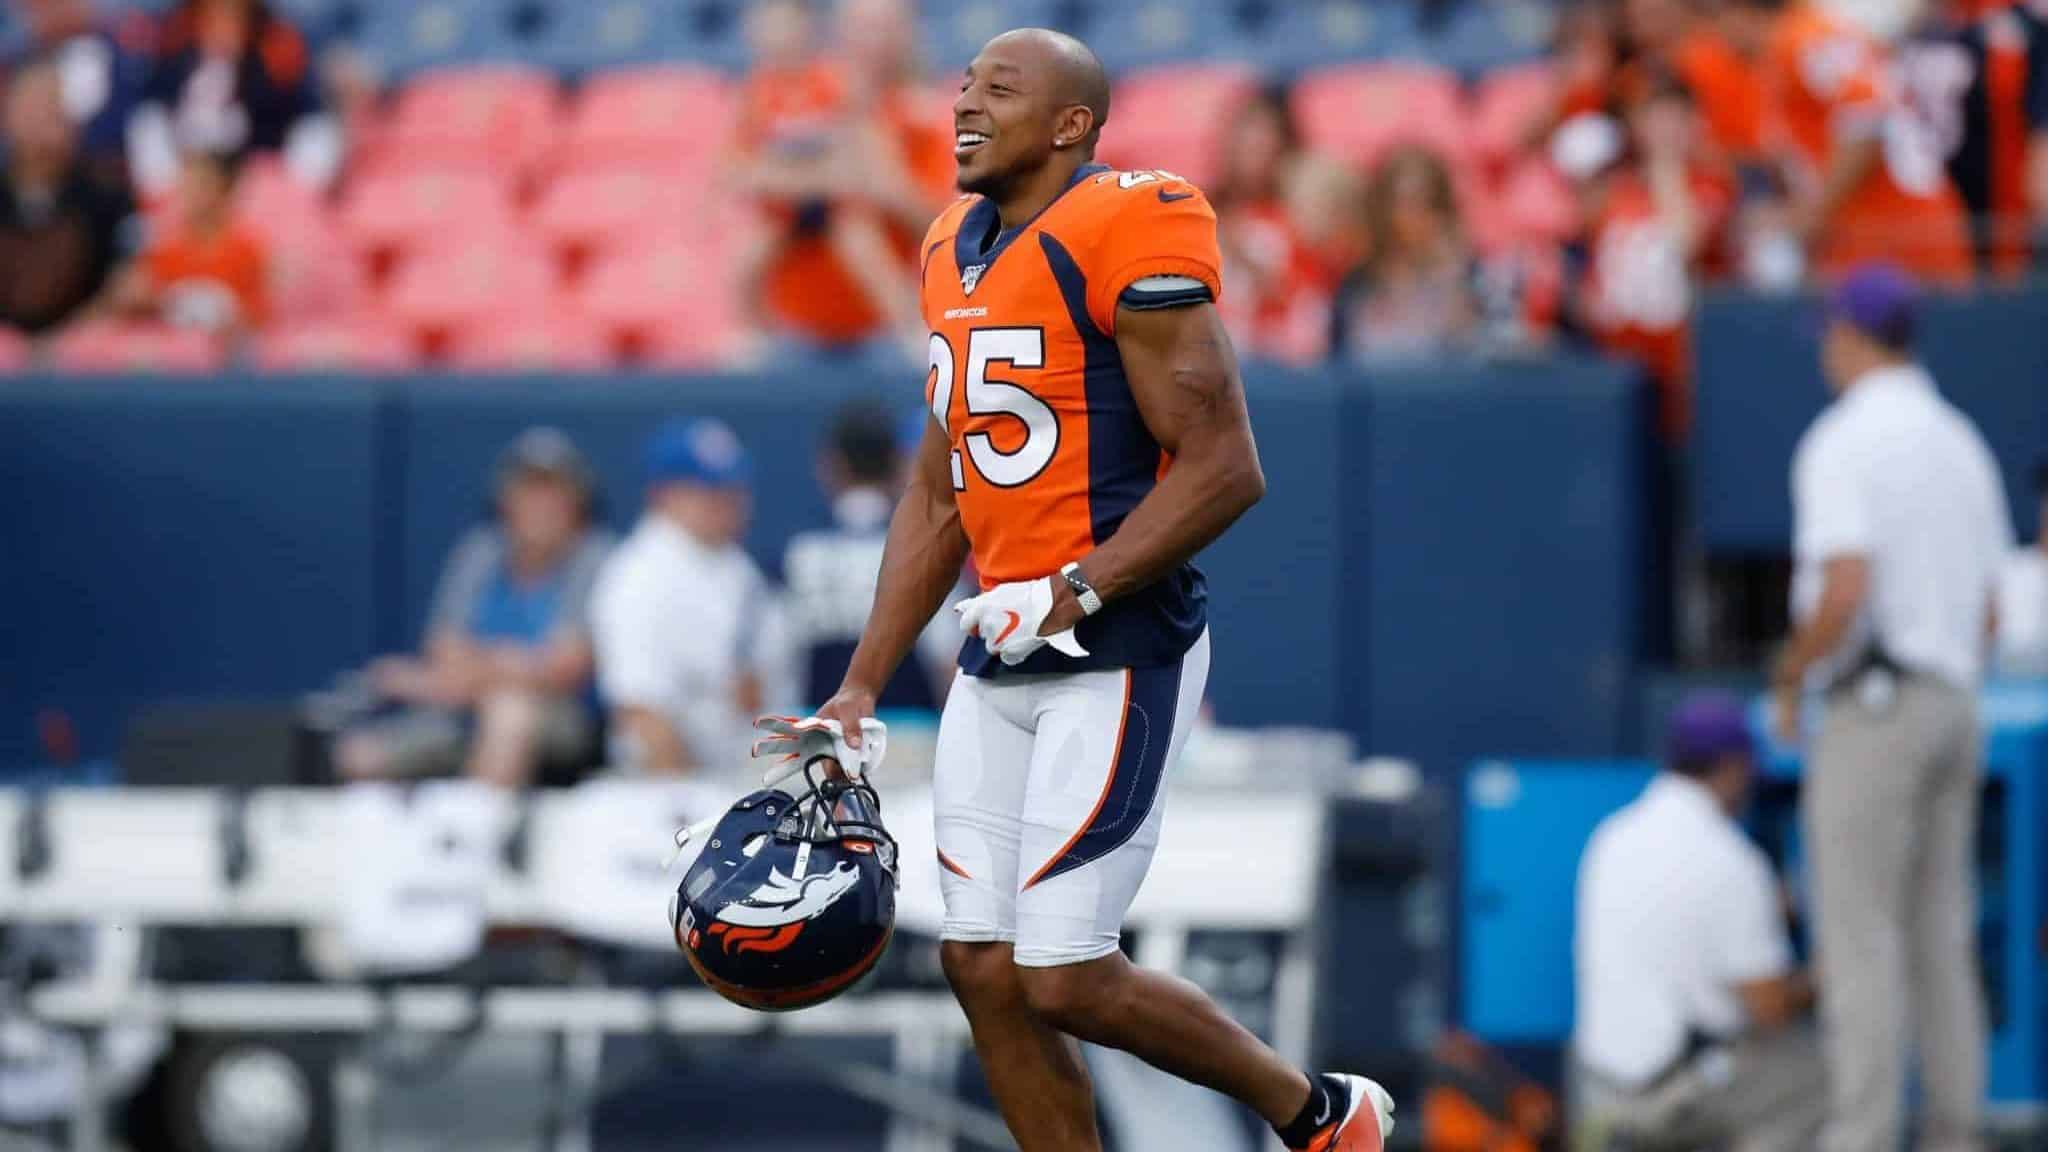 DENVER, CO - AUGUST 29: Cornerback Chris Harris #25 of the Denver Broncos runs on the field before a preseason game against the Arizona Cardinals at Broncos Stadium at Mile High on August 29, 2019 in Denver, Colorado.